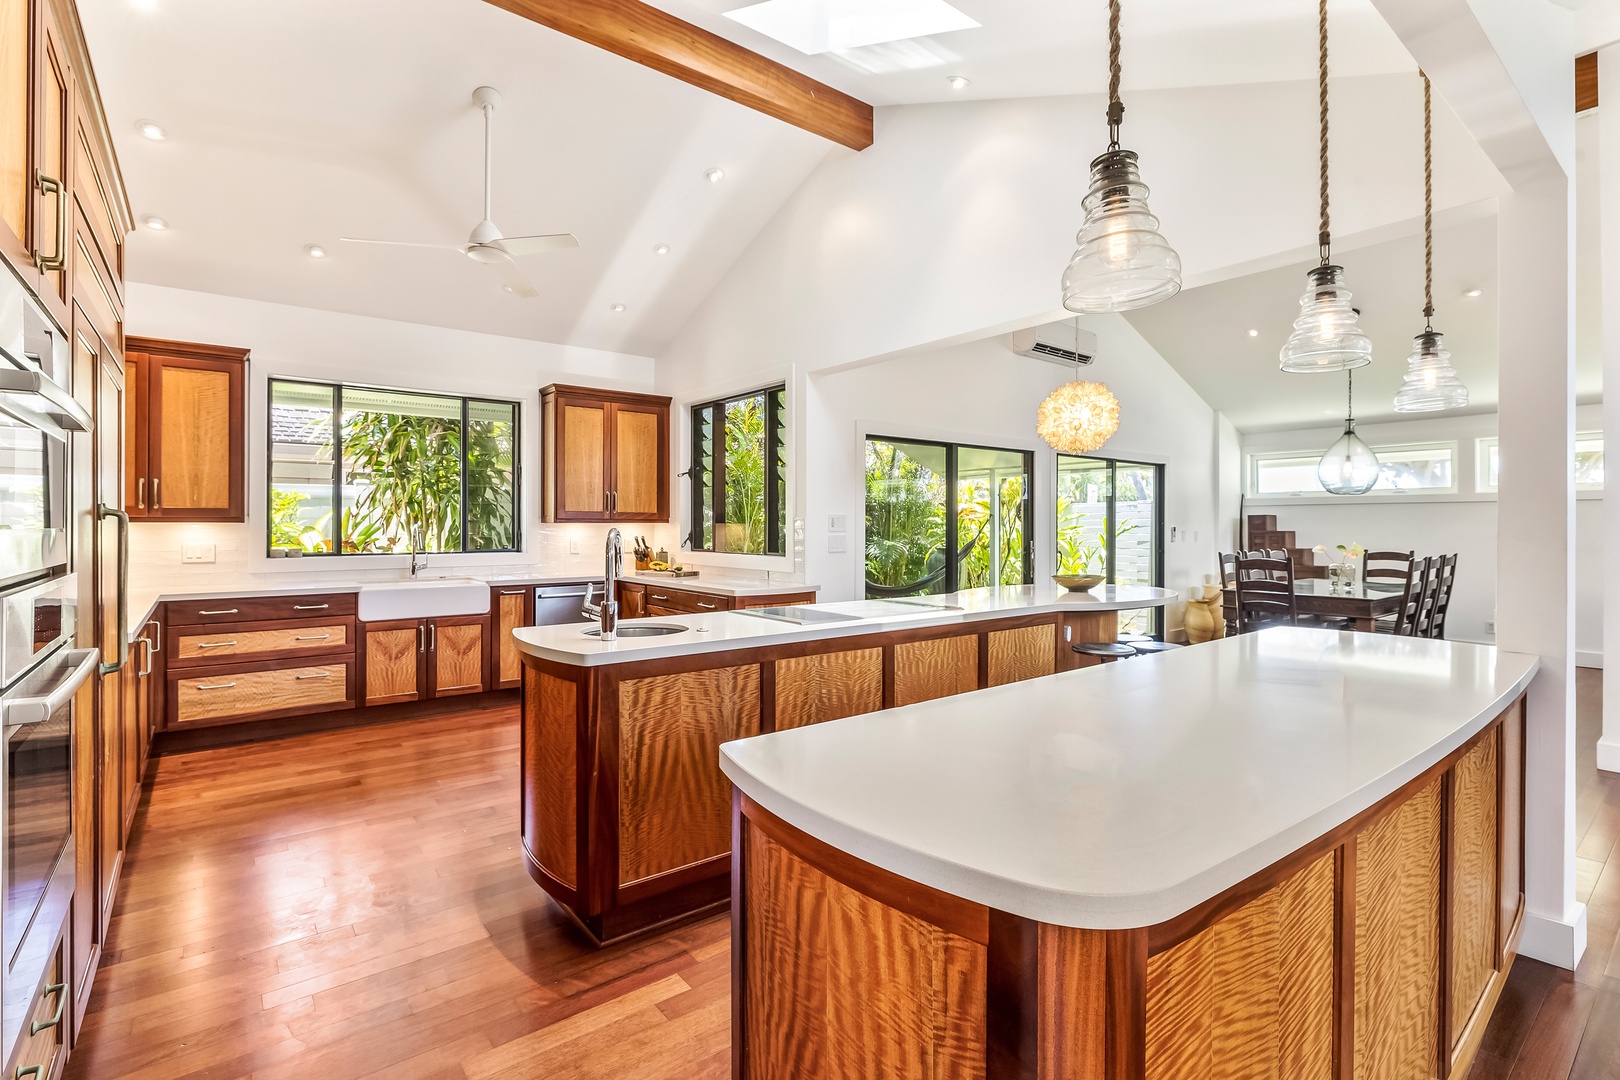 Kailua Vacation Rentals, Hale Ohana - This kitchen is immense and has 2 islands